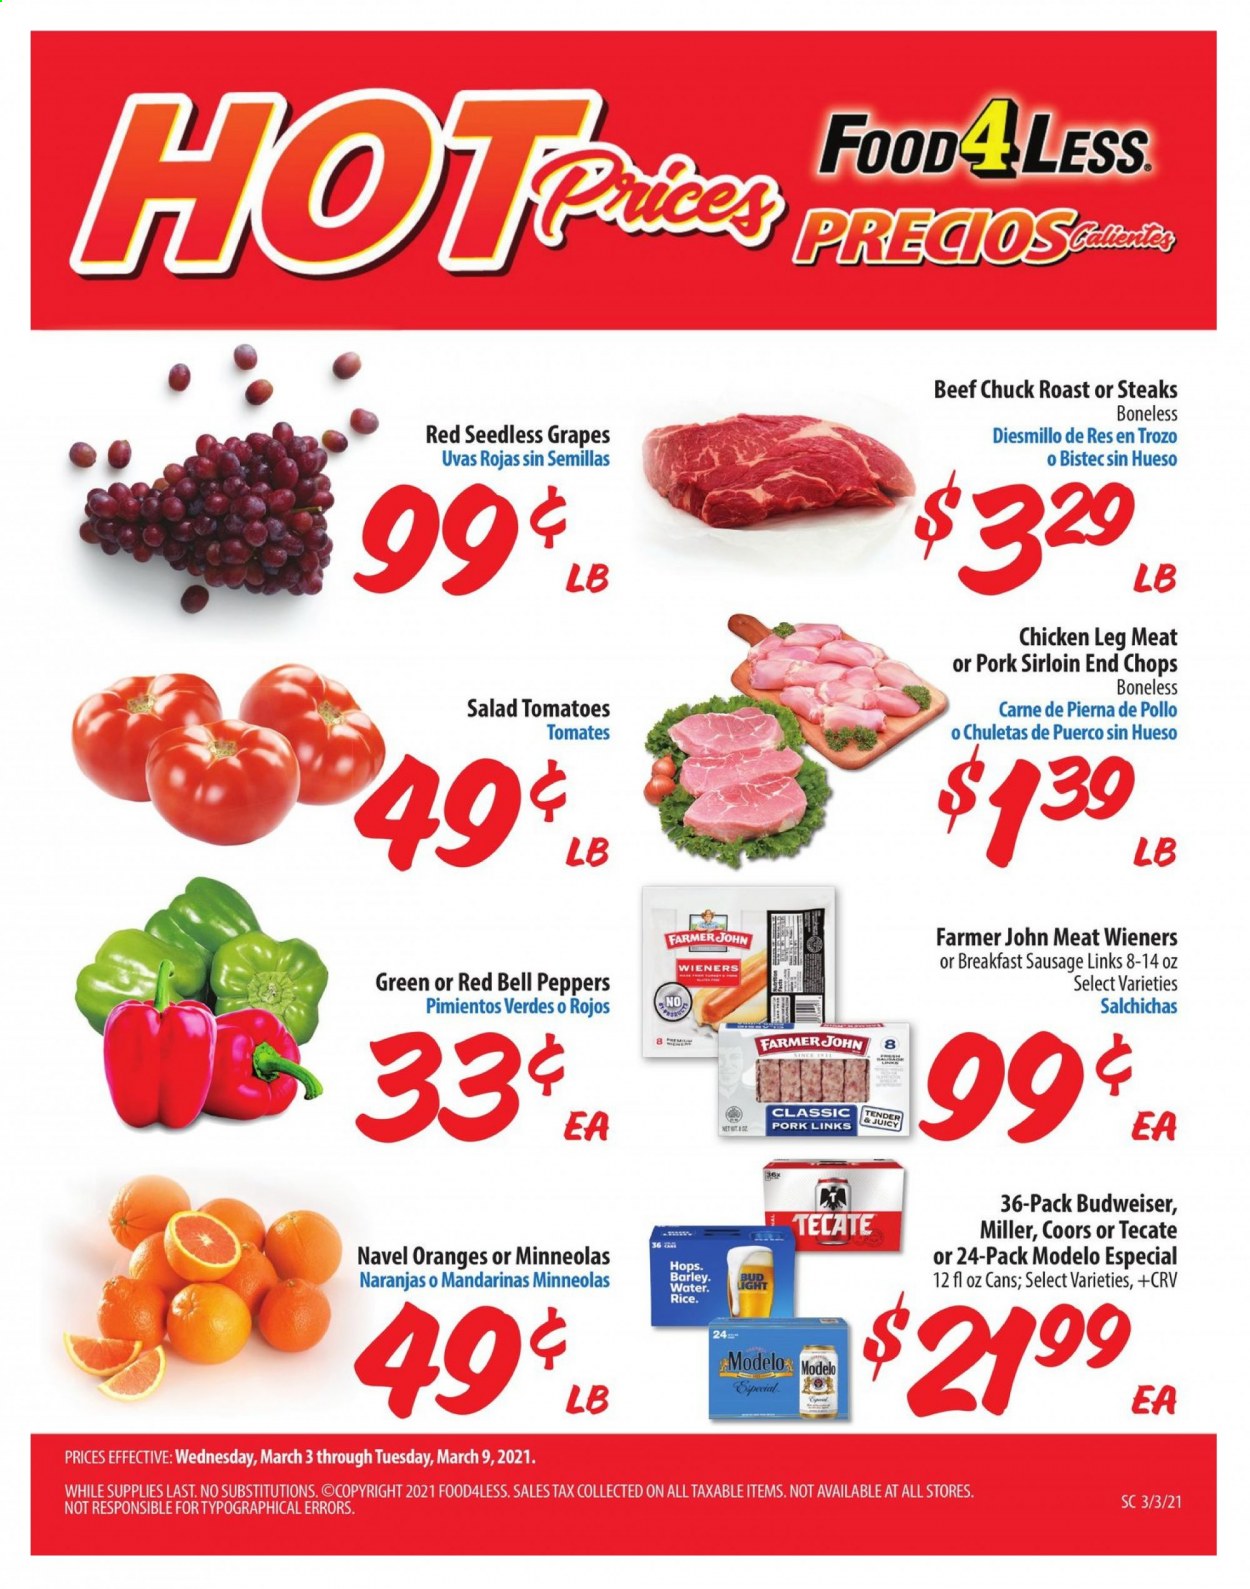 thumbnail - Food 4 Less Flyer - 03/03/2021 - 03/09/2021 - Sales products - Budweiser, Coors, bell peppers, seedless grapes, oranges, salad, sausage, beer, Miller, Modelo, beef meat, steak, chuck roast, pork loin. Page 1.